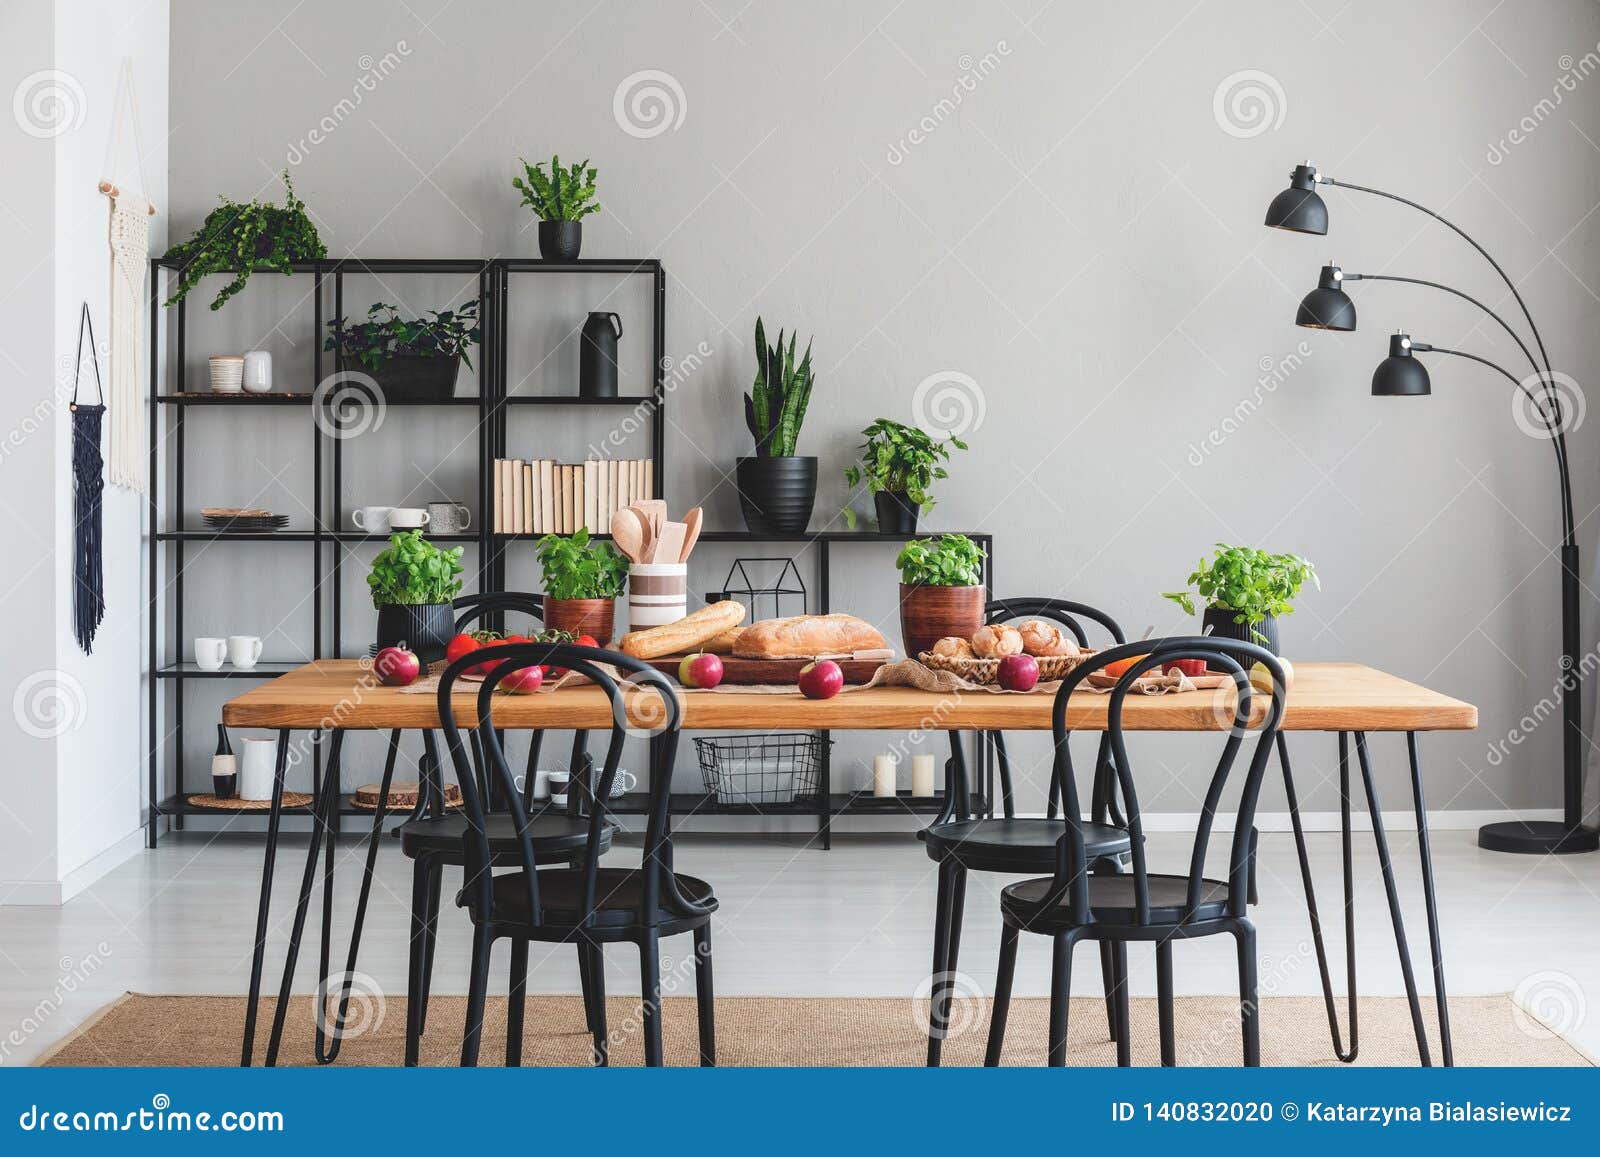 Real Photo of Cozy Dining Room Interior with a Table Full of Vegetables and  Herbs, and Black Shelf in the Background Stock Photo - Image of design,  basil: 140832020